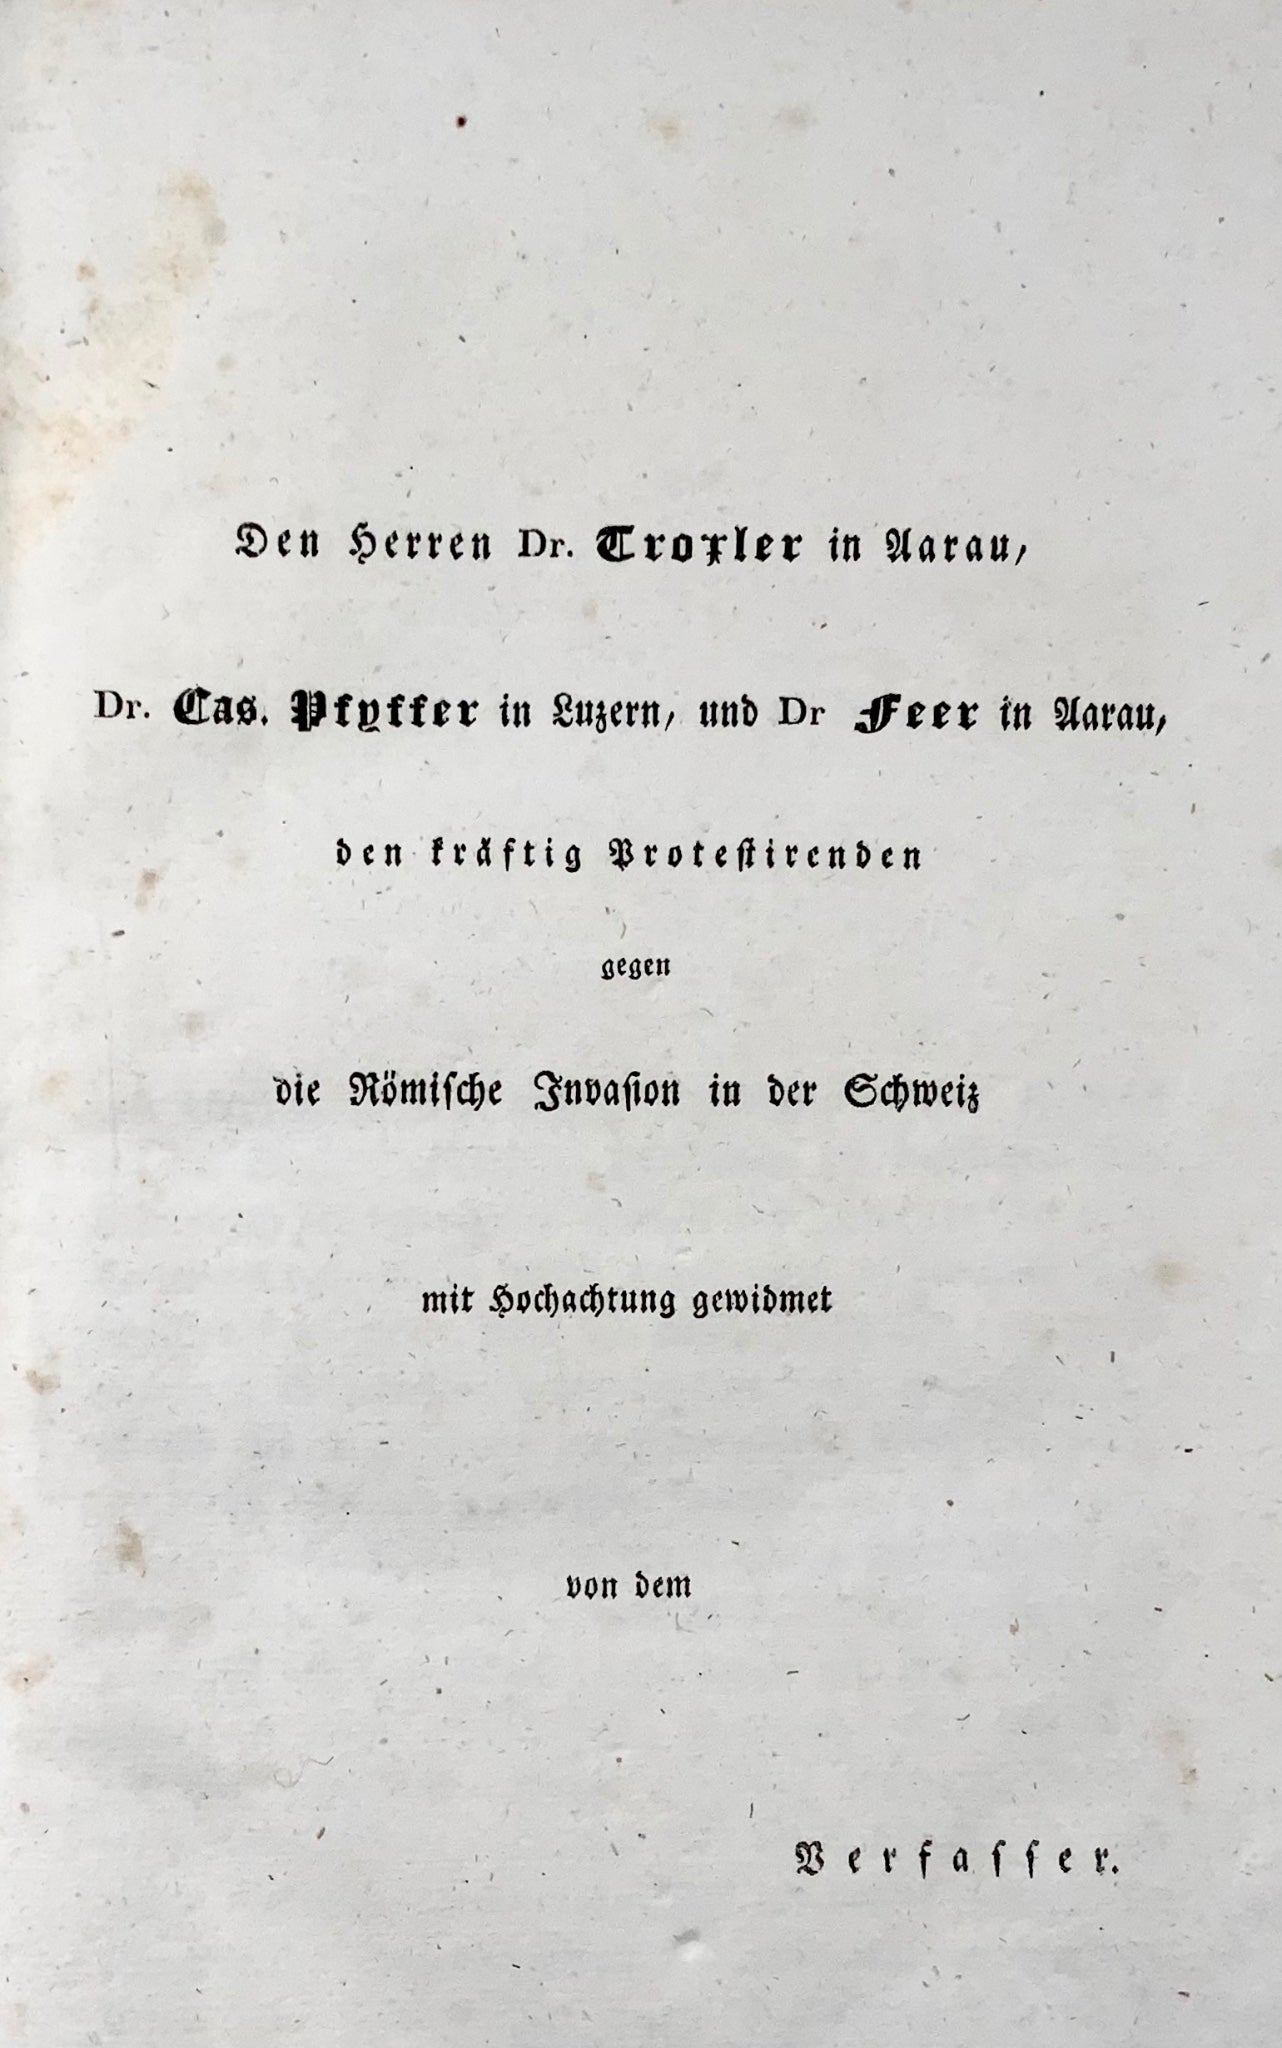 1833 Ludwig Snell, liberal radical critique of Roman Catholics in Switzerland